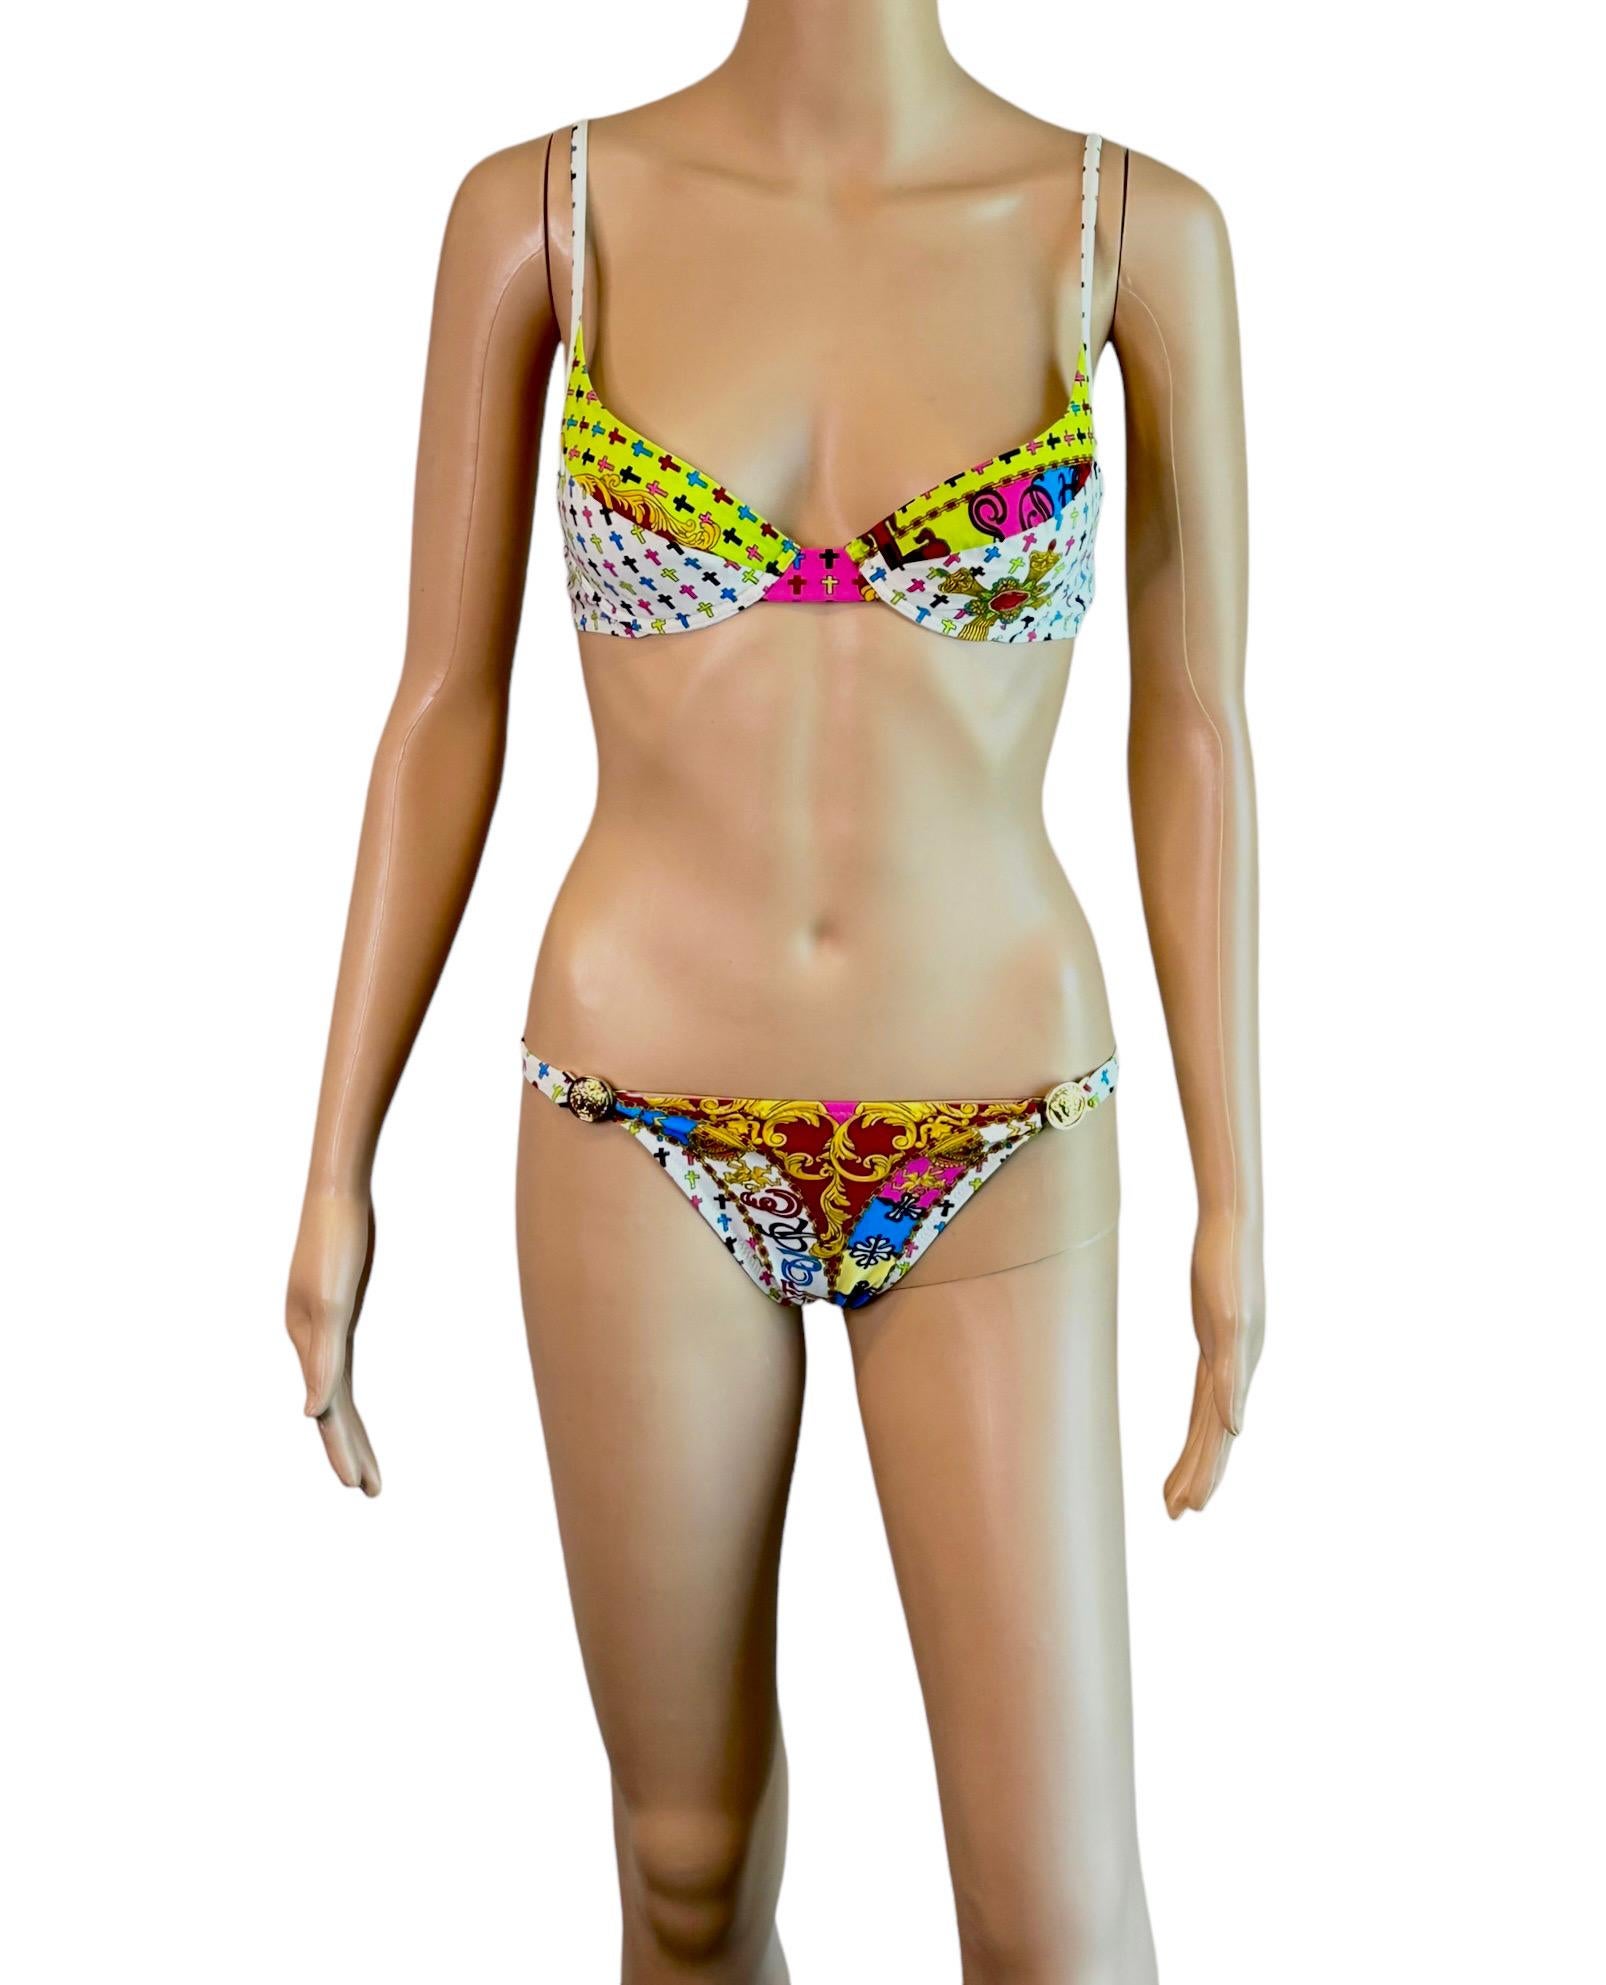 Versace S/S 2005 Medusa Logo Embellished Two-Piece Bikini Set Swimsuit Swimwear In Excellent Condition For Sale In Naples, FL